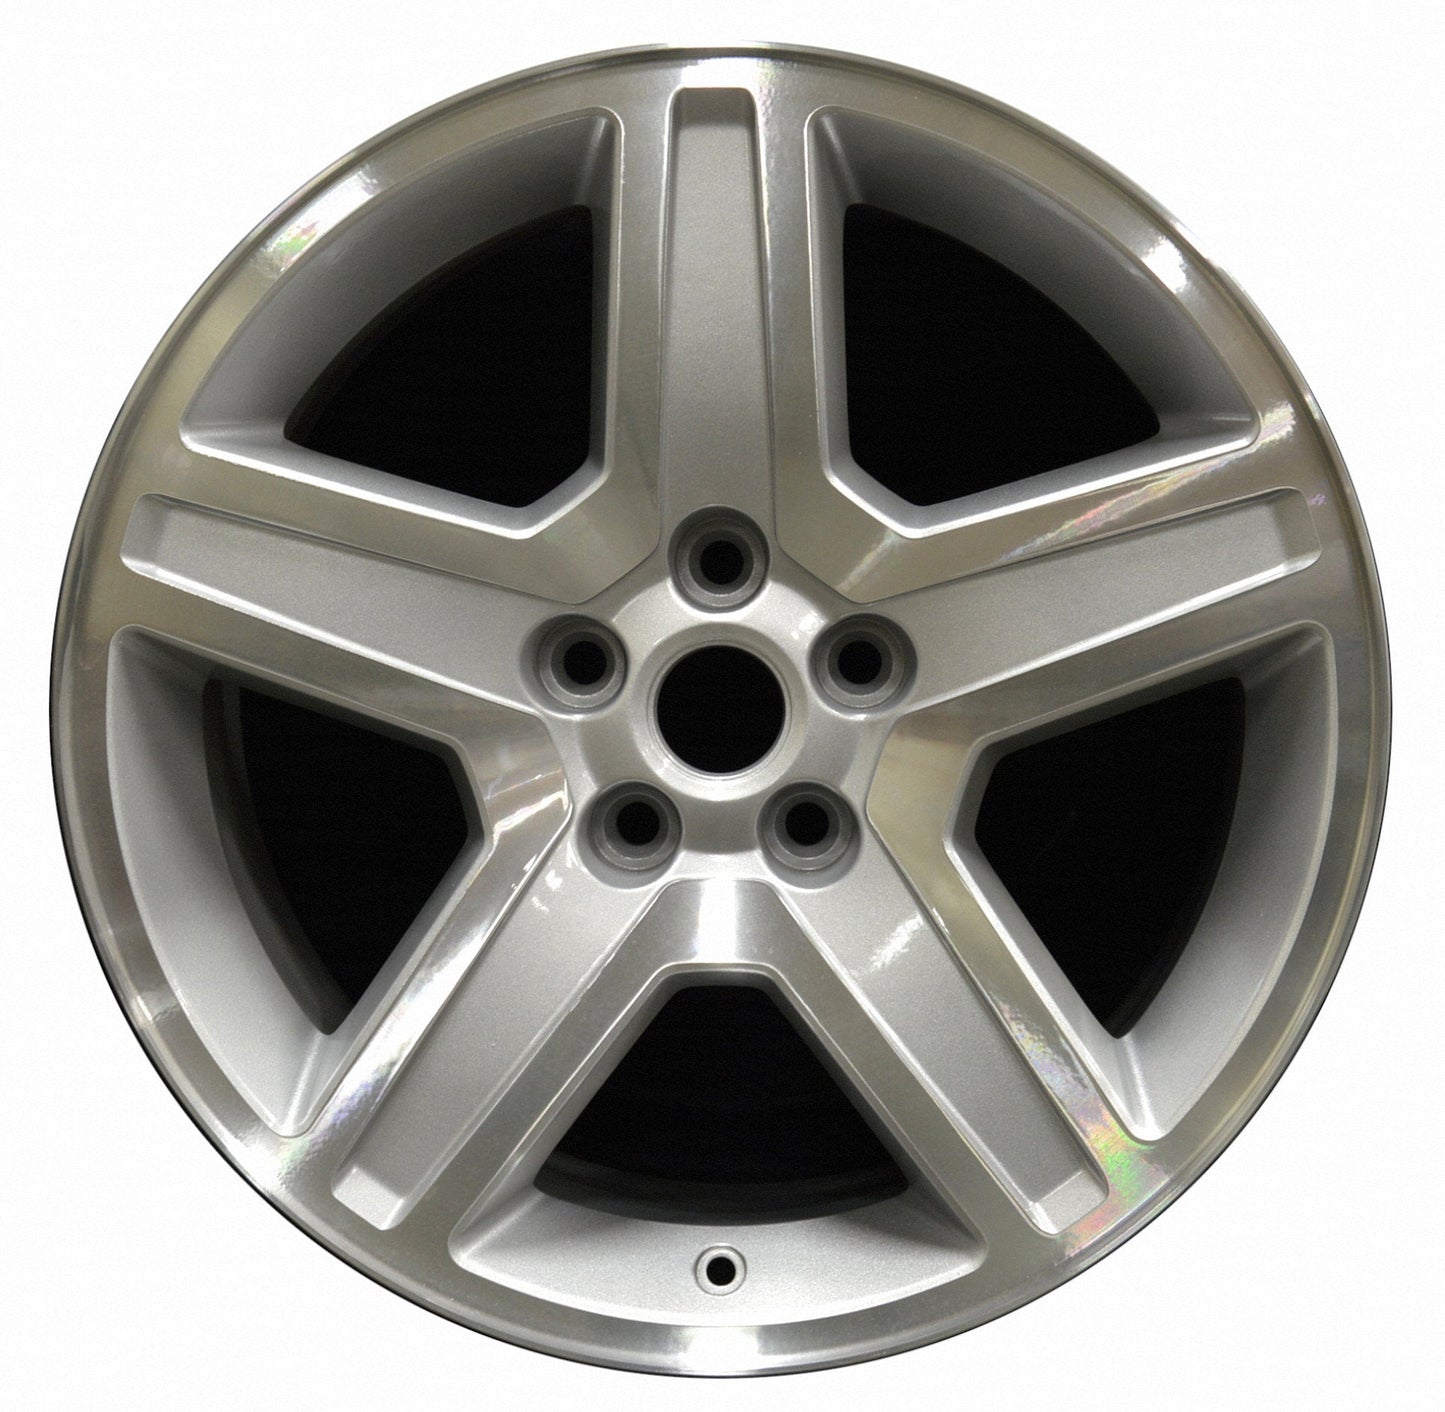 Dodge Charger  2008, 2009, 2010 Factory OEM Car Wheel Size 18x7.5 Alloy WAO.2326.PS13.MA